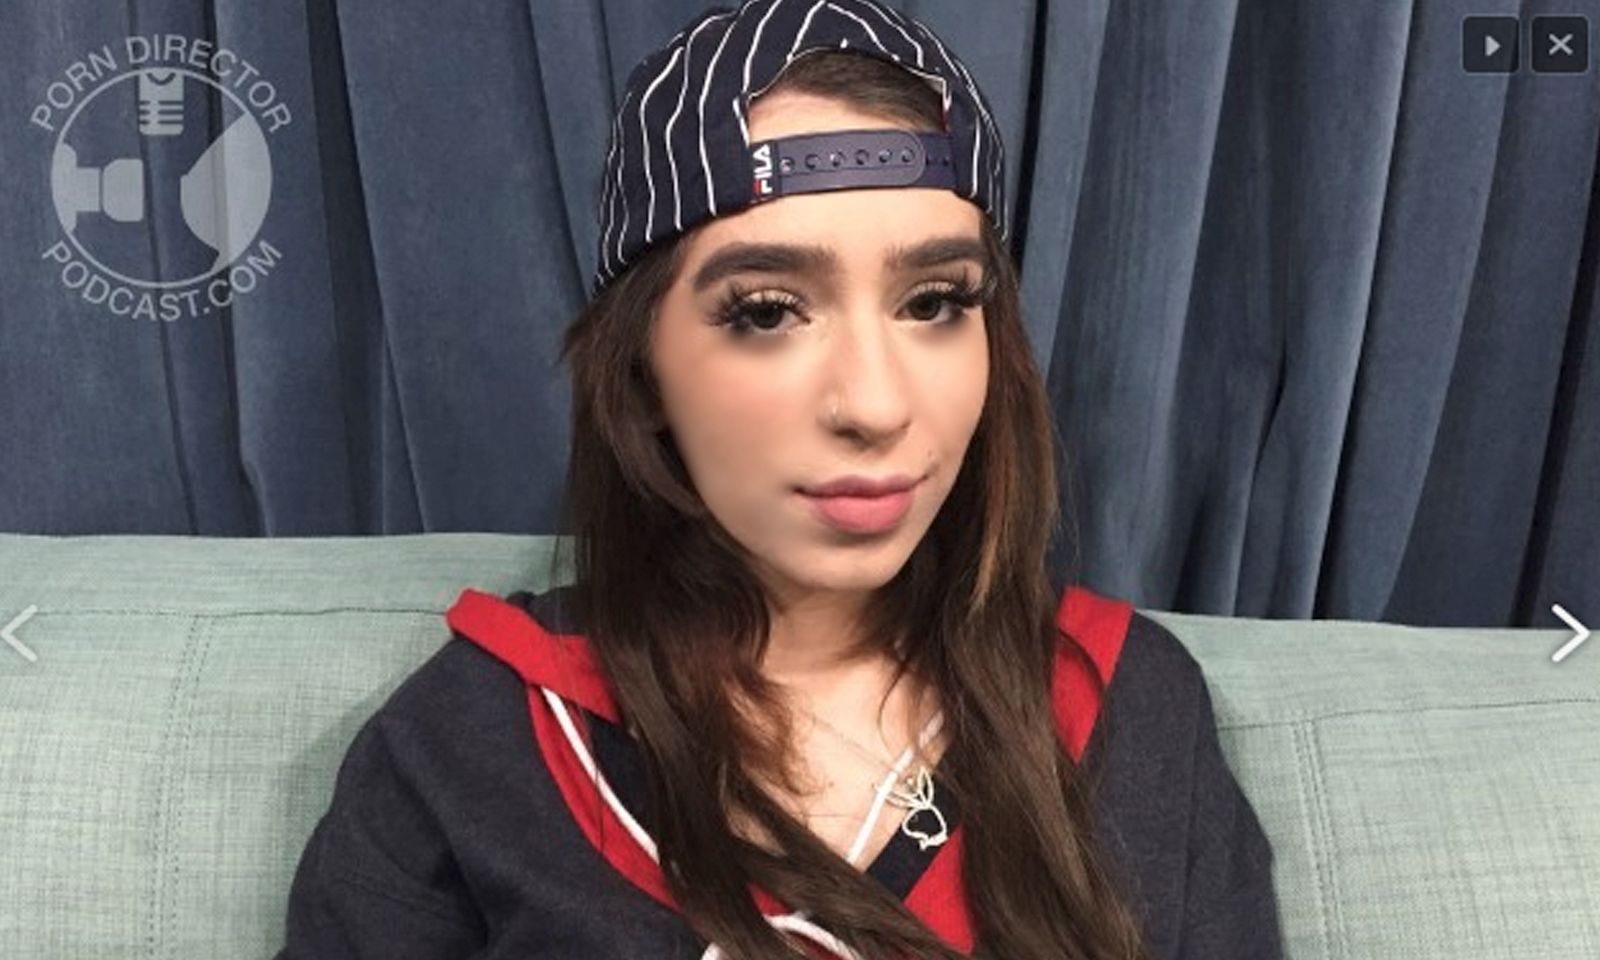 ‘Porn Director Podcast’ Features Joseline Kelly